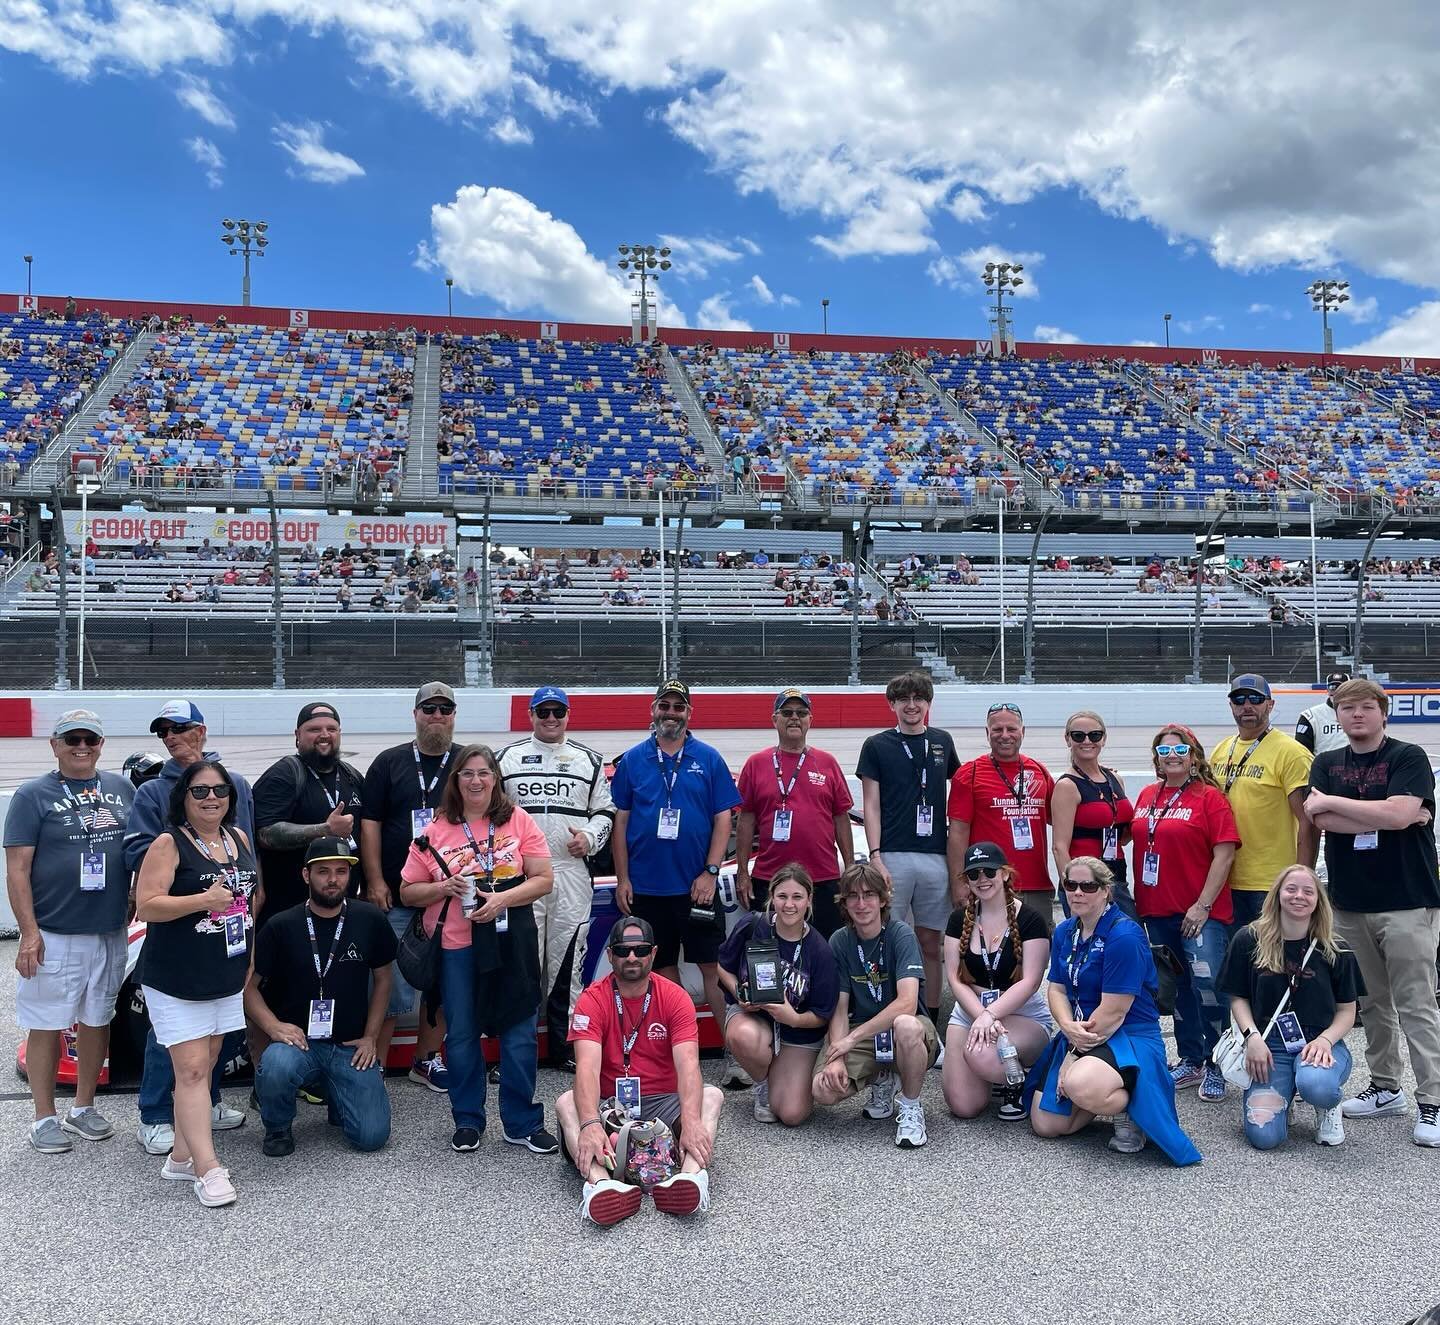 What a special weekend with Liberty Brew Coffee at Darlington Raceway with Patrick Emerling!

We were thrilled to honor a few veterans at the track and on the car, and meet so many incredible people. This was one for the books!